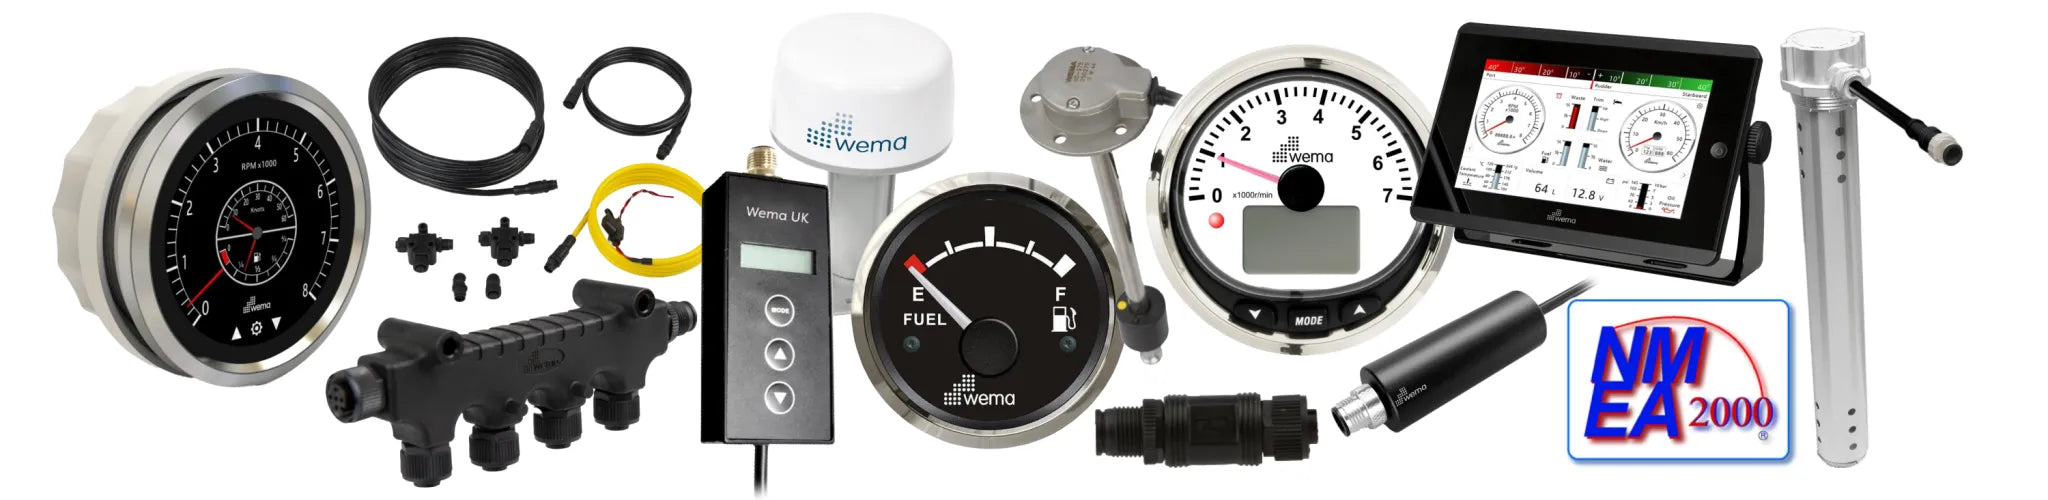 Certified NMEA2000 Products